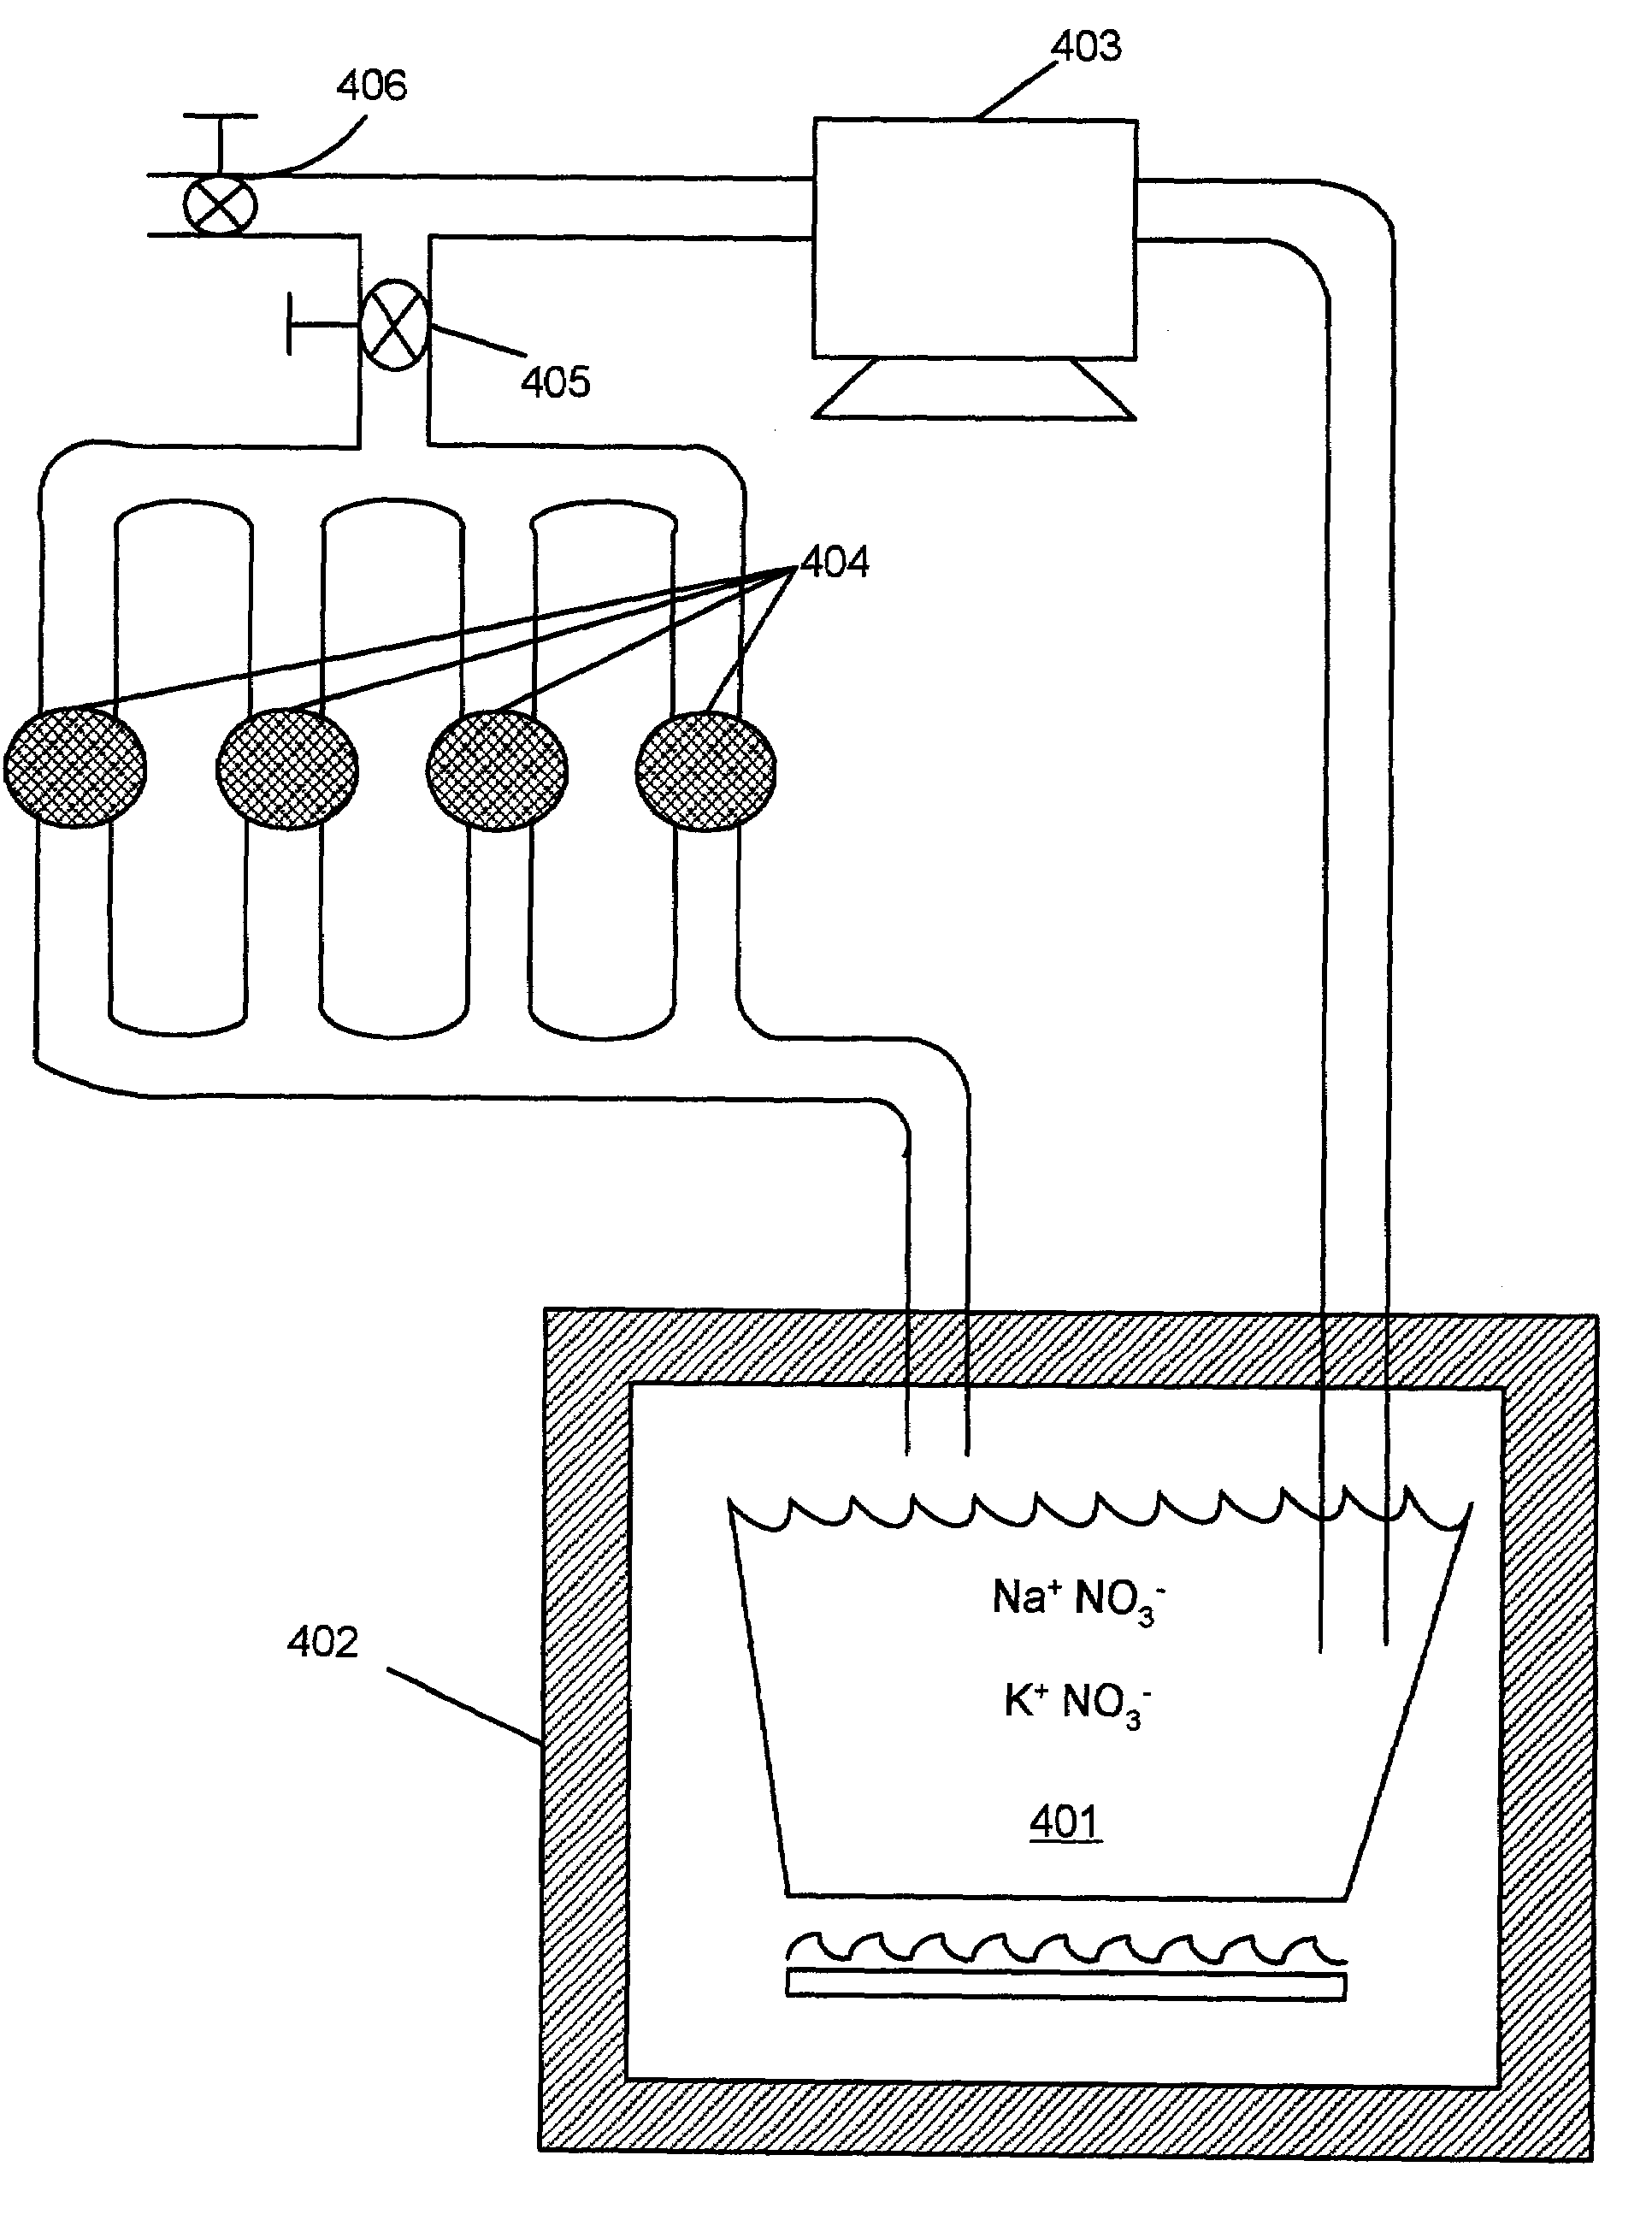 Chemical strengthening process for disks used in disk drive data storage devices